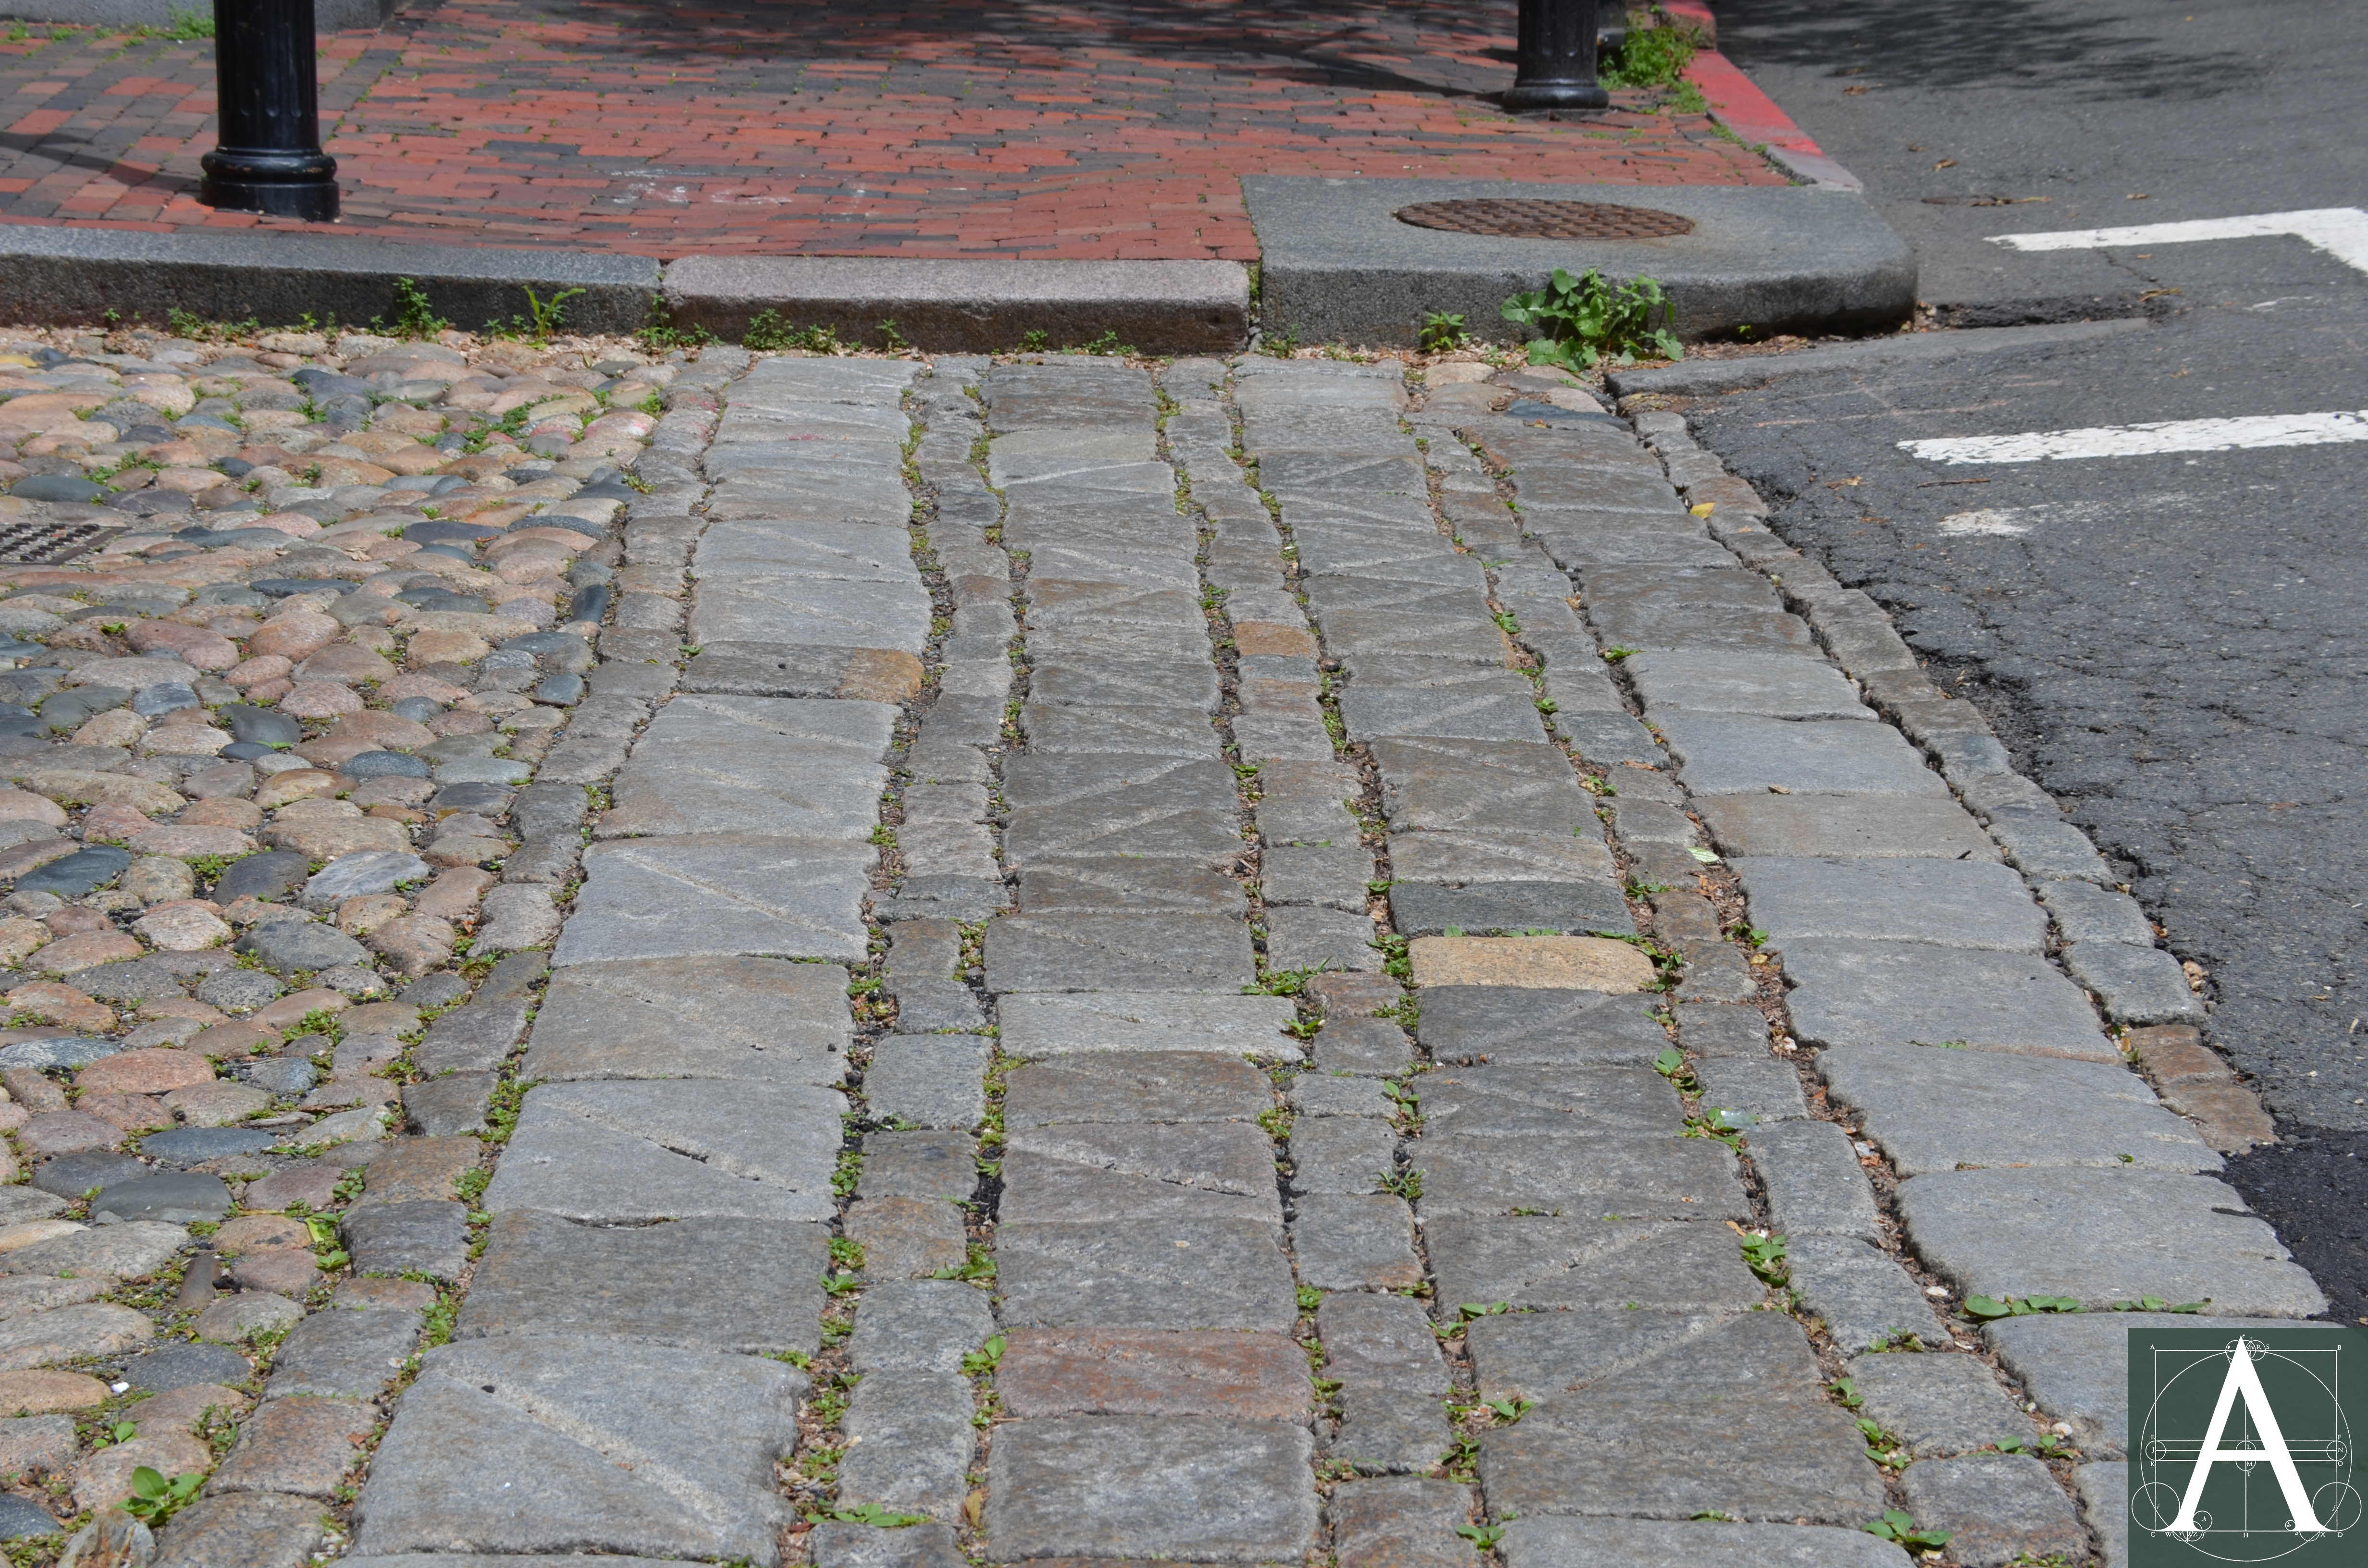 BostonSidewalks Technique - Everything You Need to Know Before